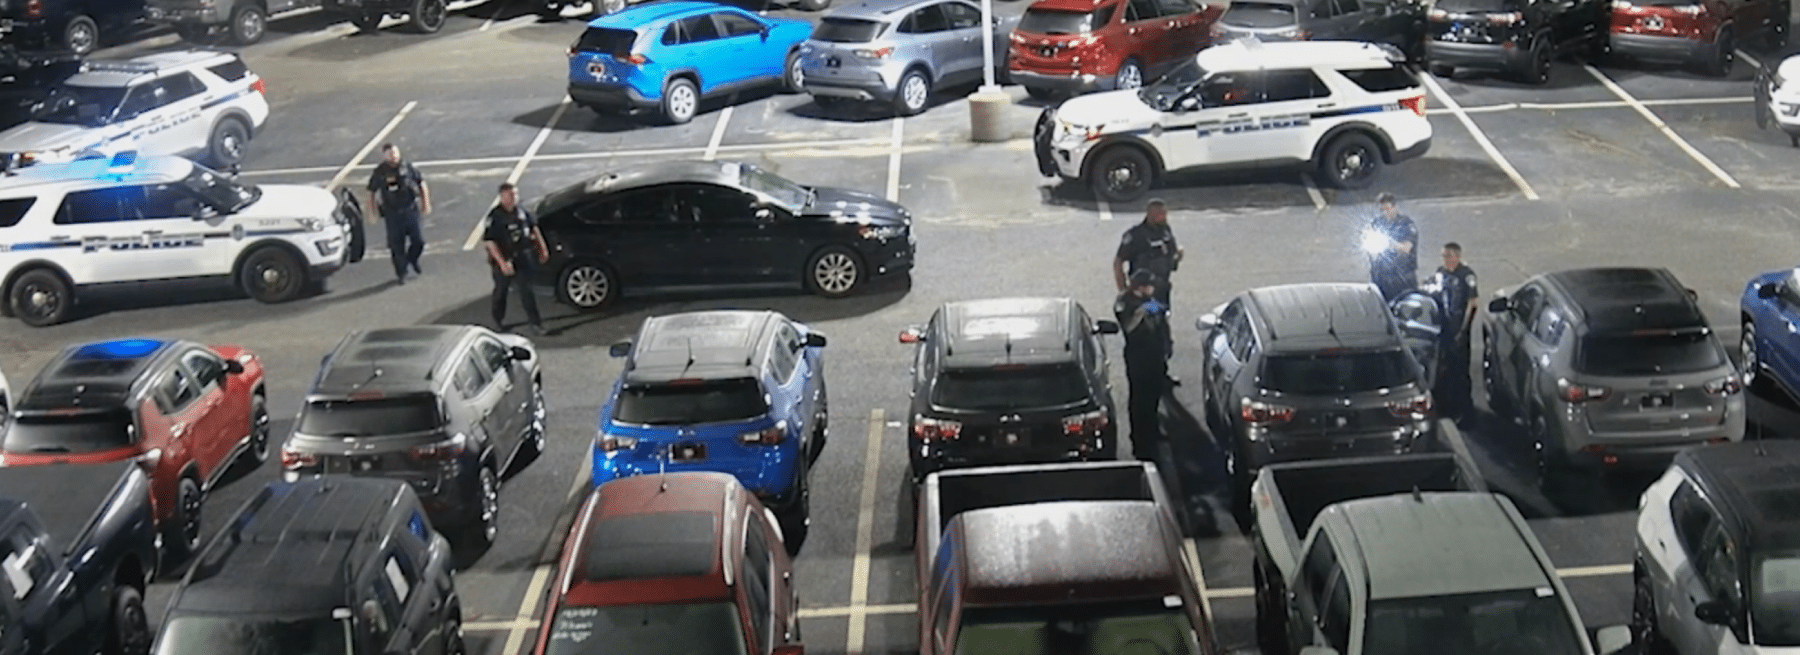 Person defecating at auto dealership